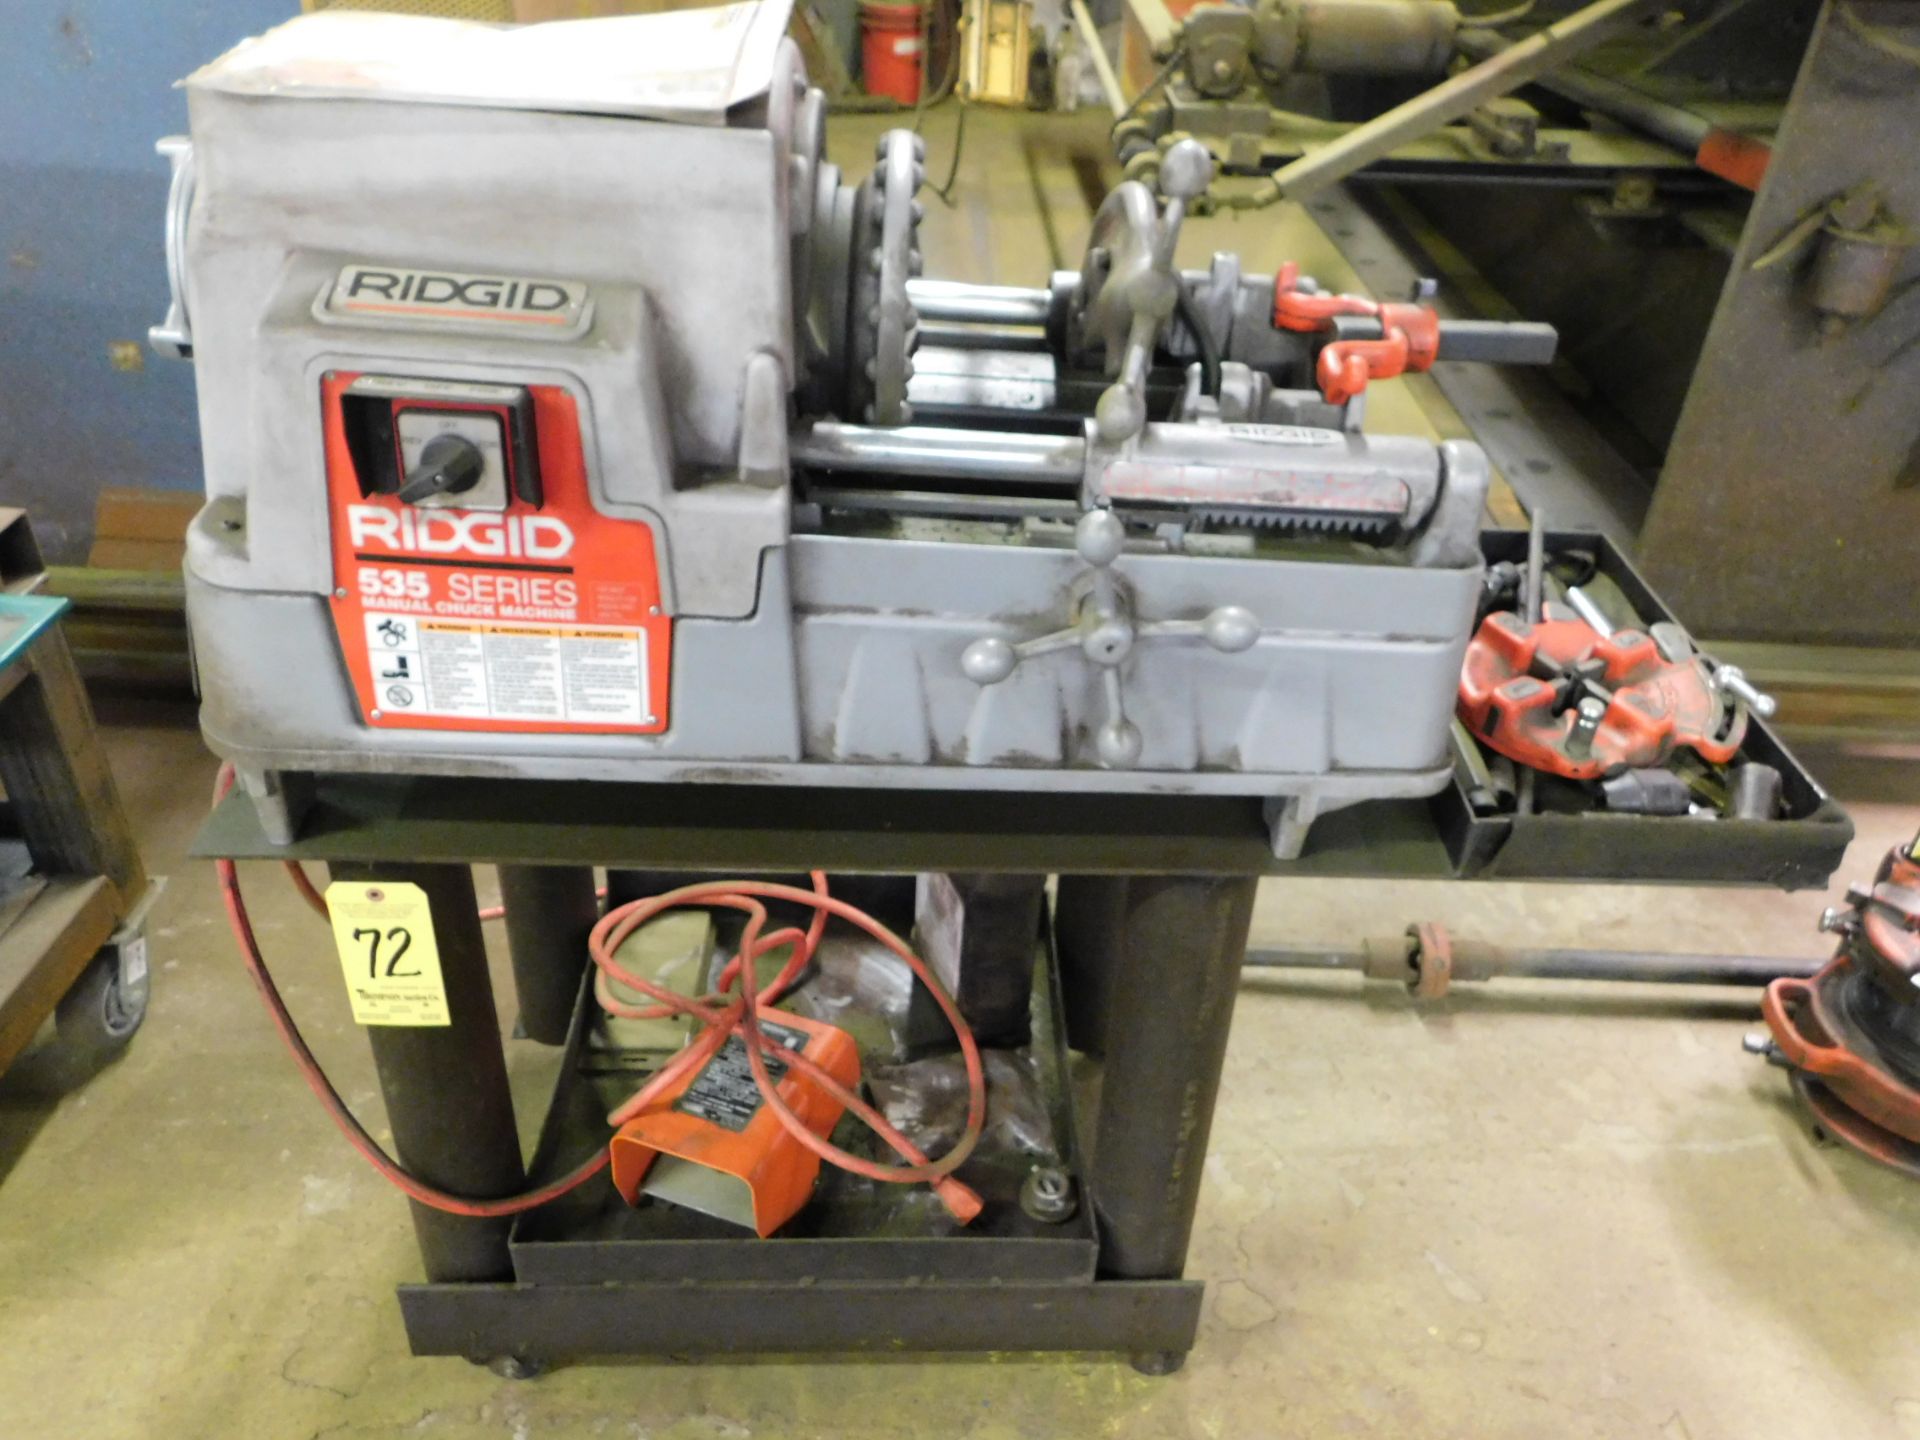 Ridgid Model 535 Pipe Threader, s/n EBE13544-0810, with Model 811A Die, Foot Pedal Controls - Image 2 of 8